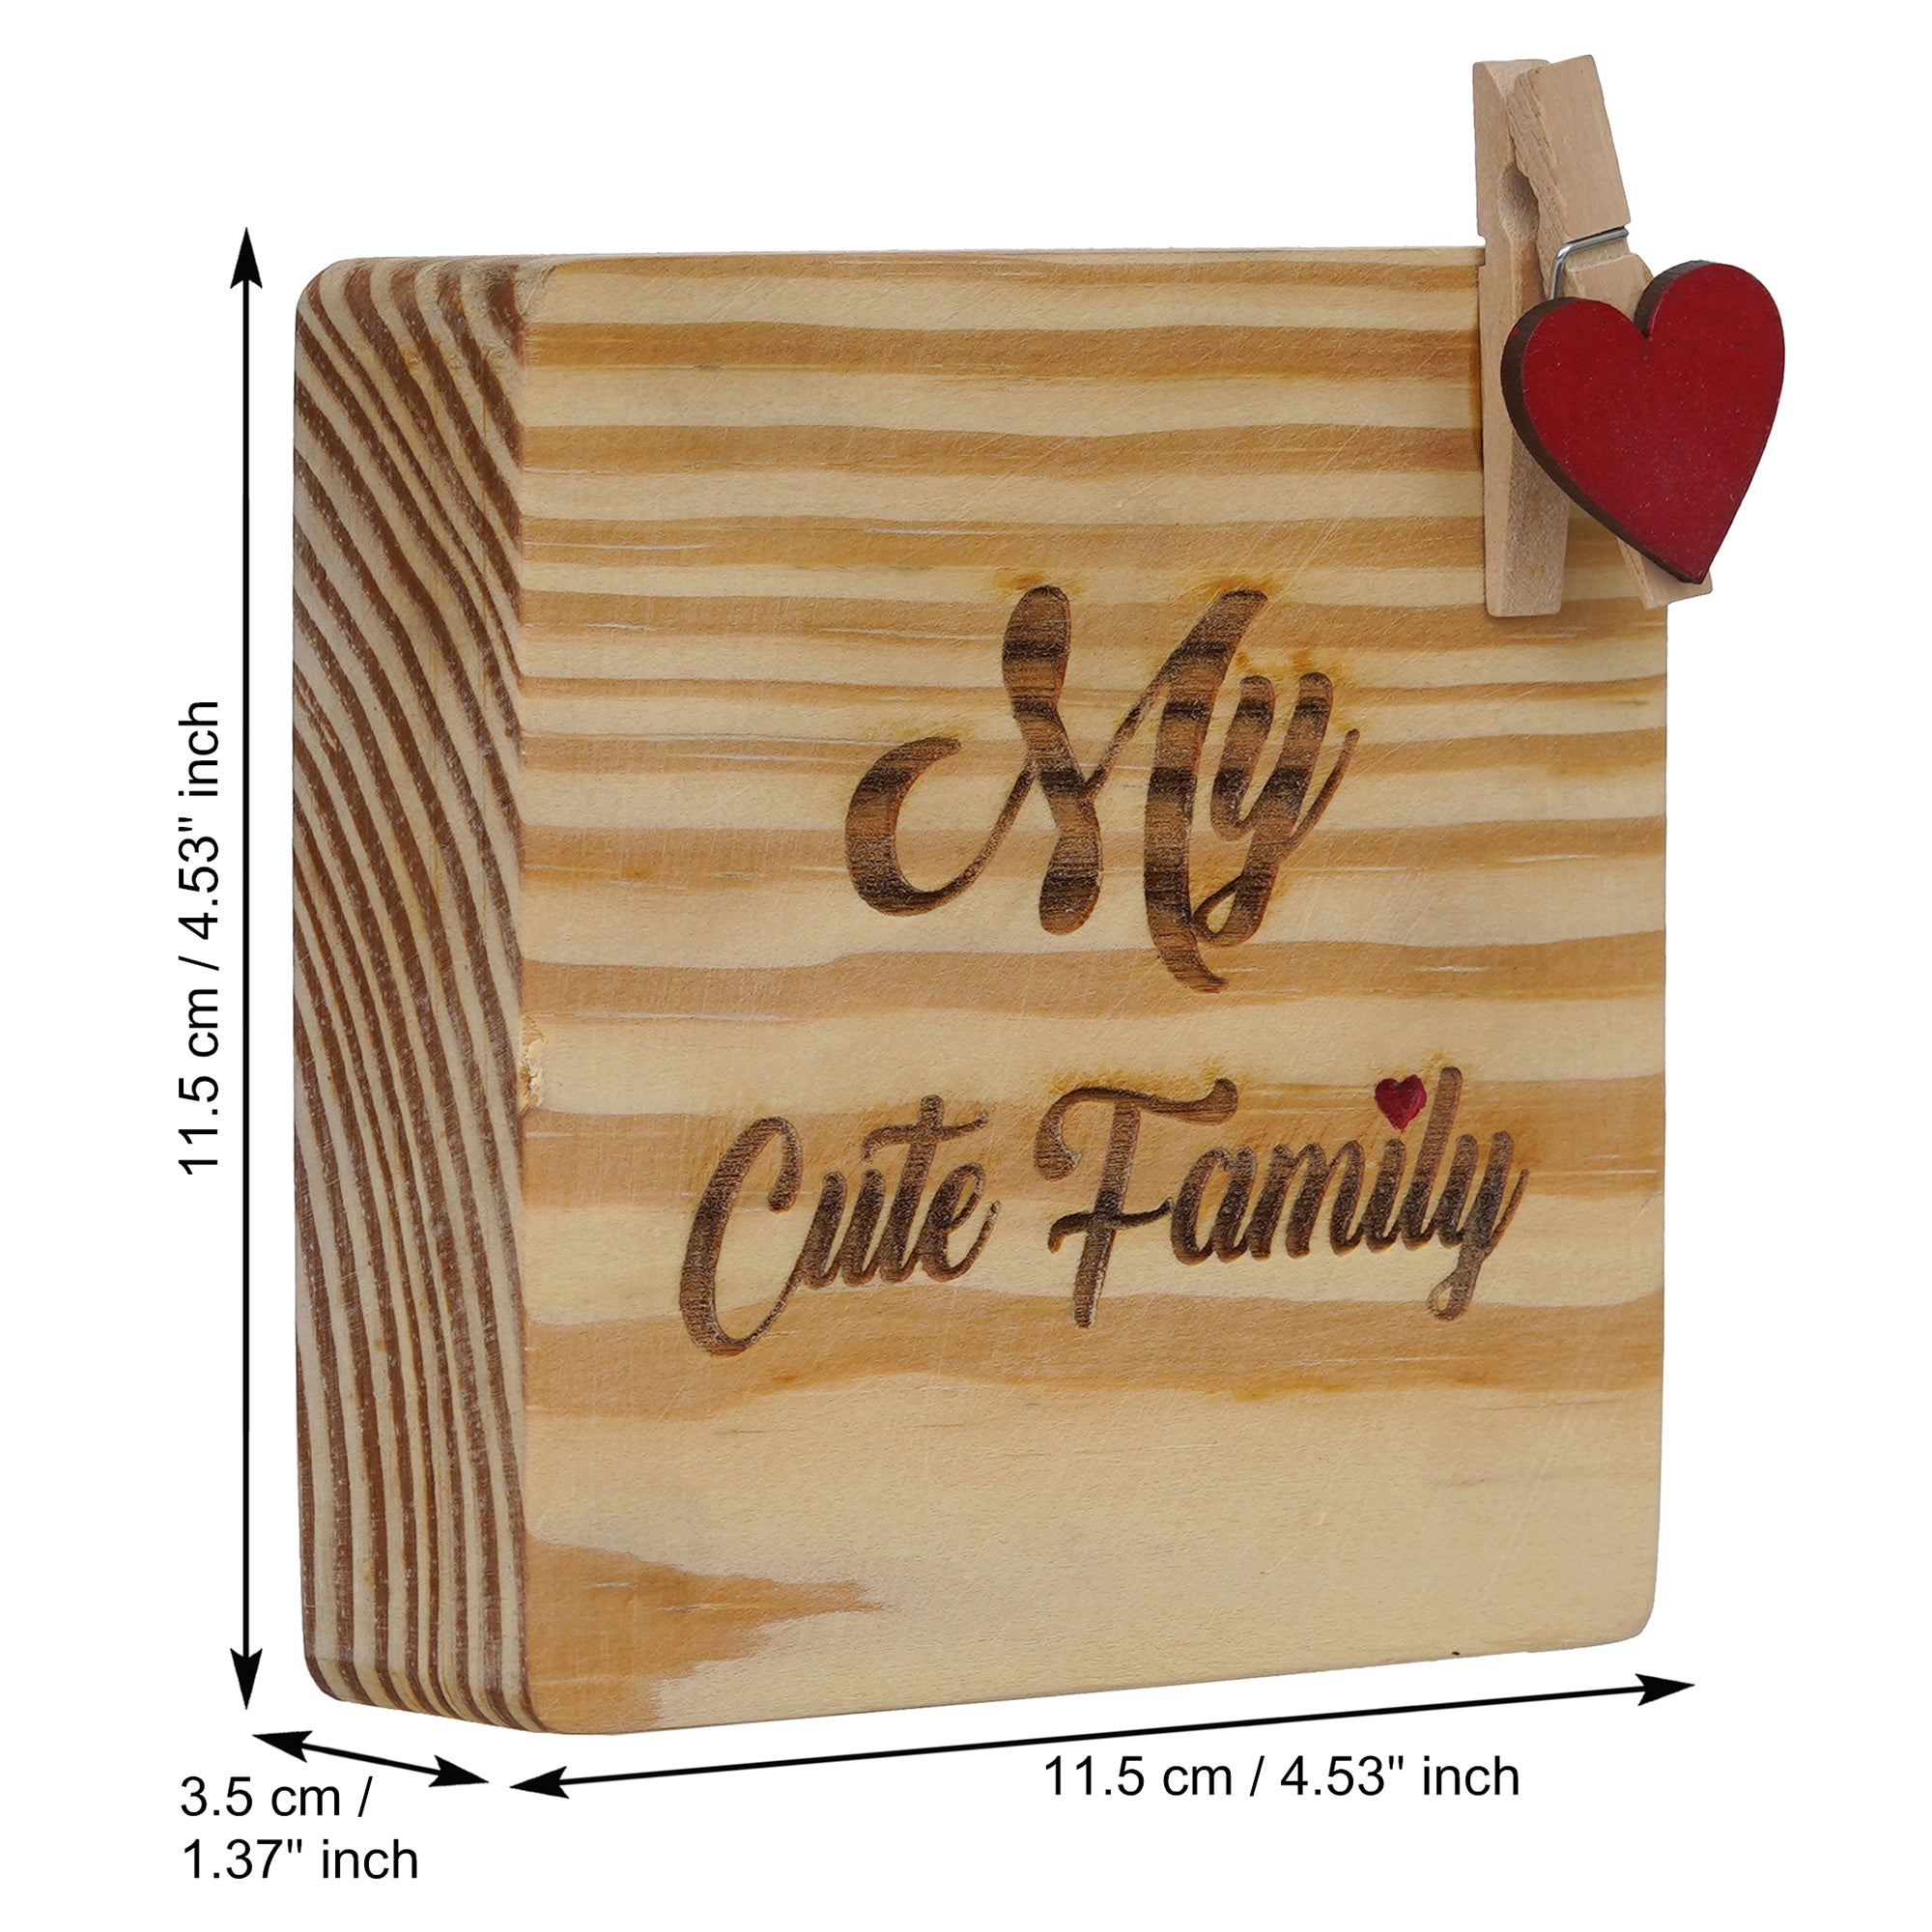 eCraftIndia Light Brown With Red Heart "My Cute Family" Wooden Photo Frame Showpiece Gift 3